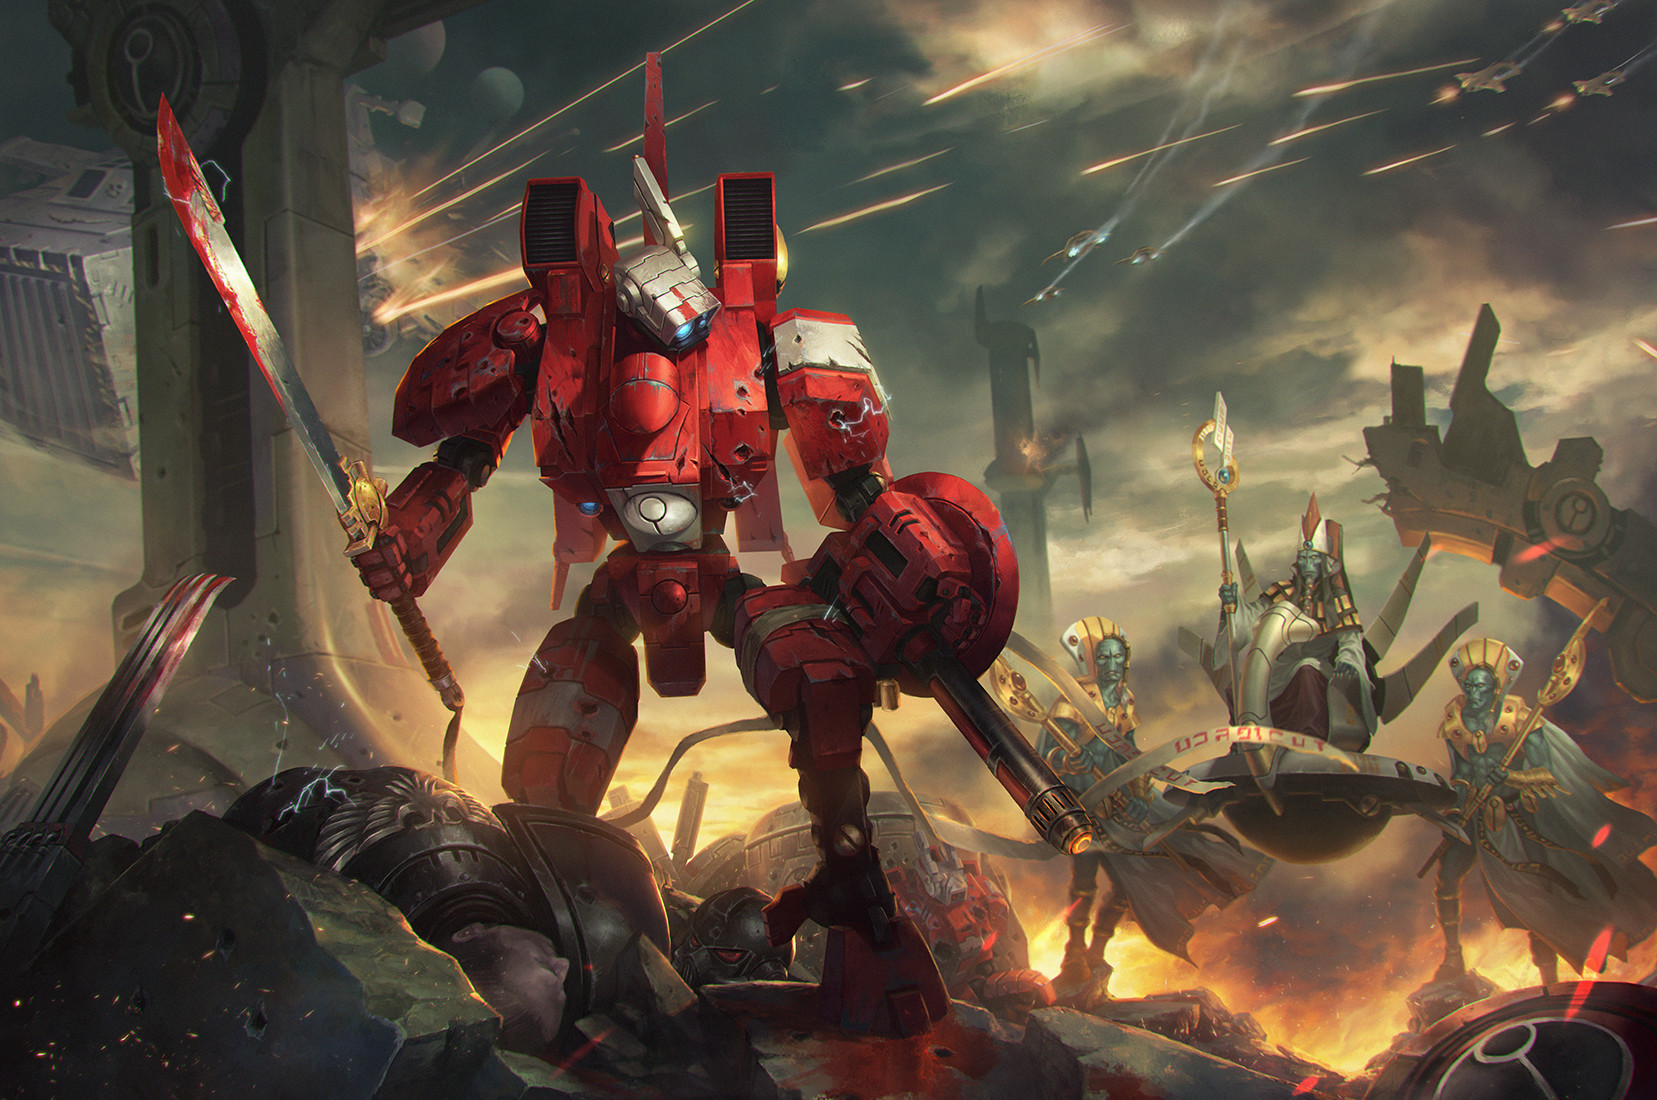 General 1657x1100 Warhammer Warhammer 40,000 Tau Tau Empire Farsight Enclaves red black white science fiction high tech Farsight sword shield blood tracer shots drone gold army battle fighting battlesuit ion blaster xenos aliens power armor jetpack fire video games video game art video game characters